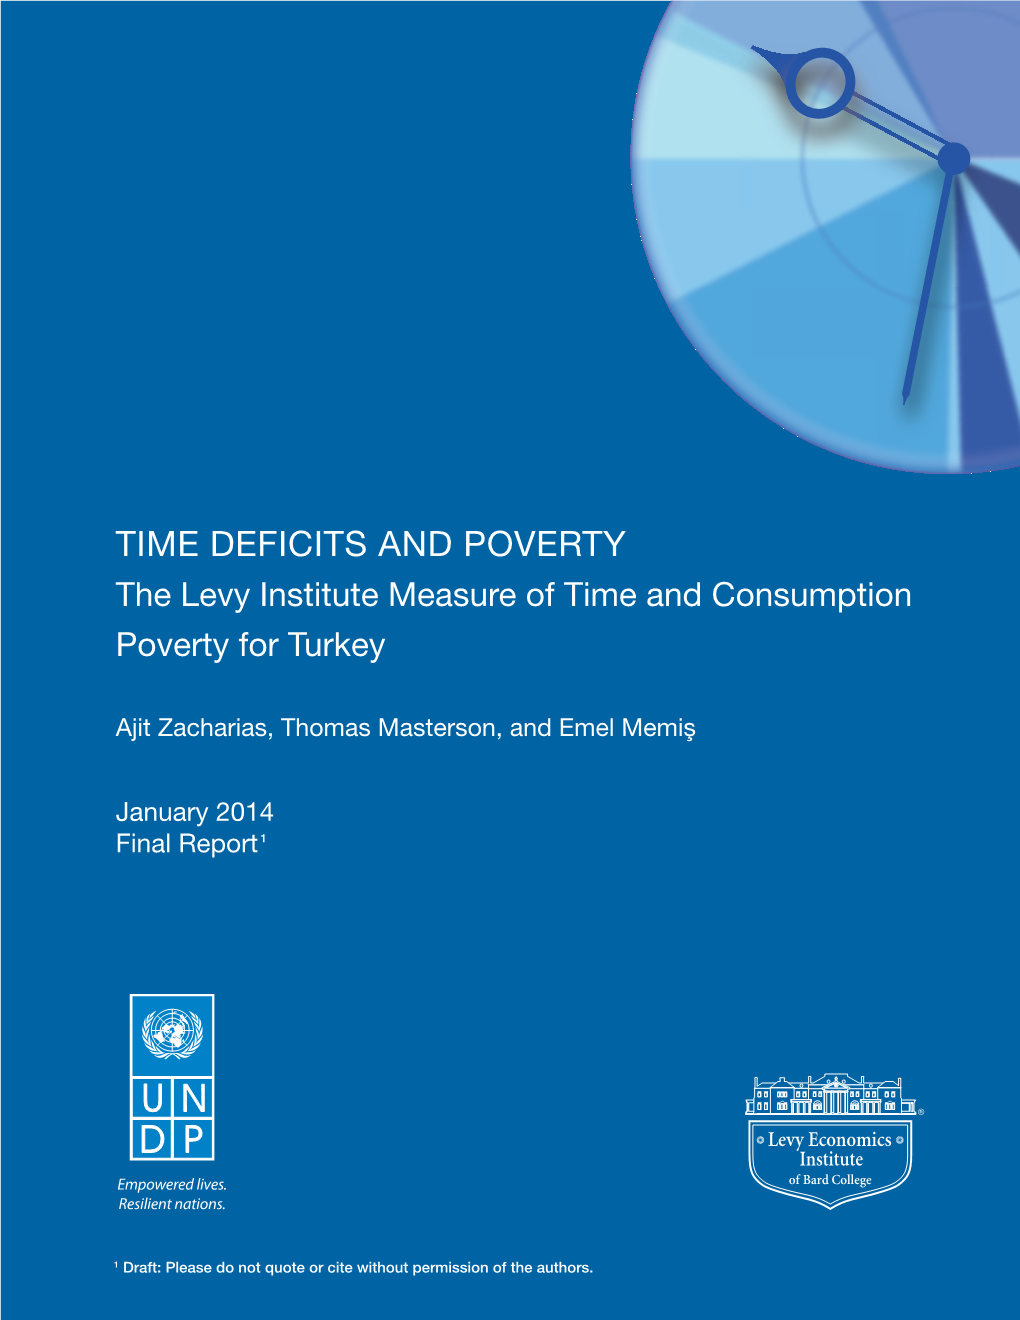 The Levy Institute Measure of Time and Consumption Poverty for Turkey